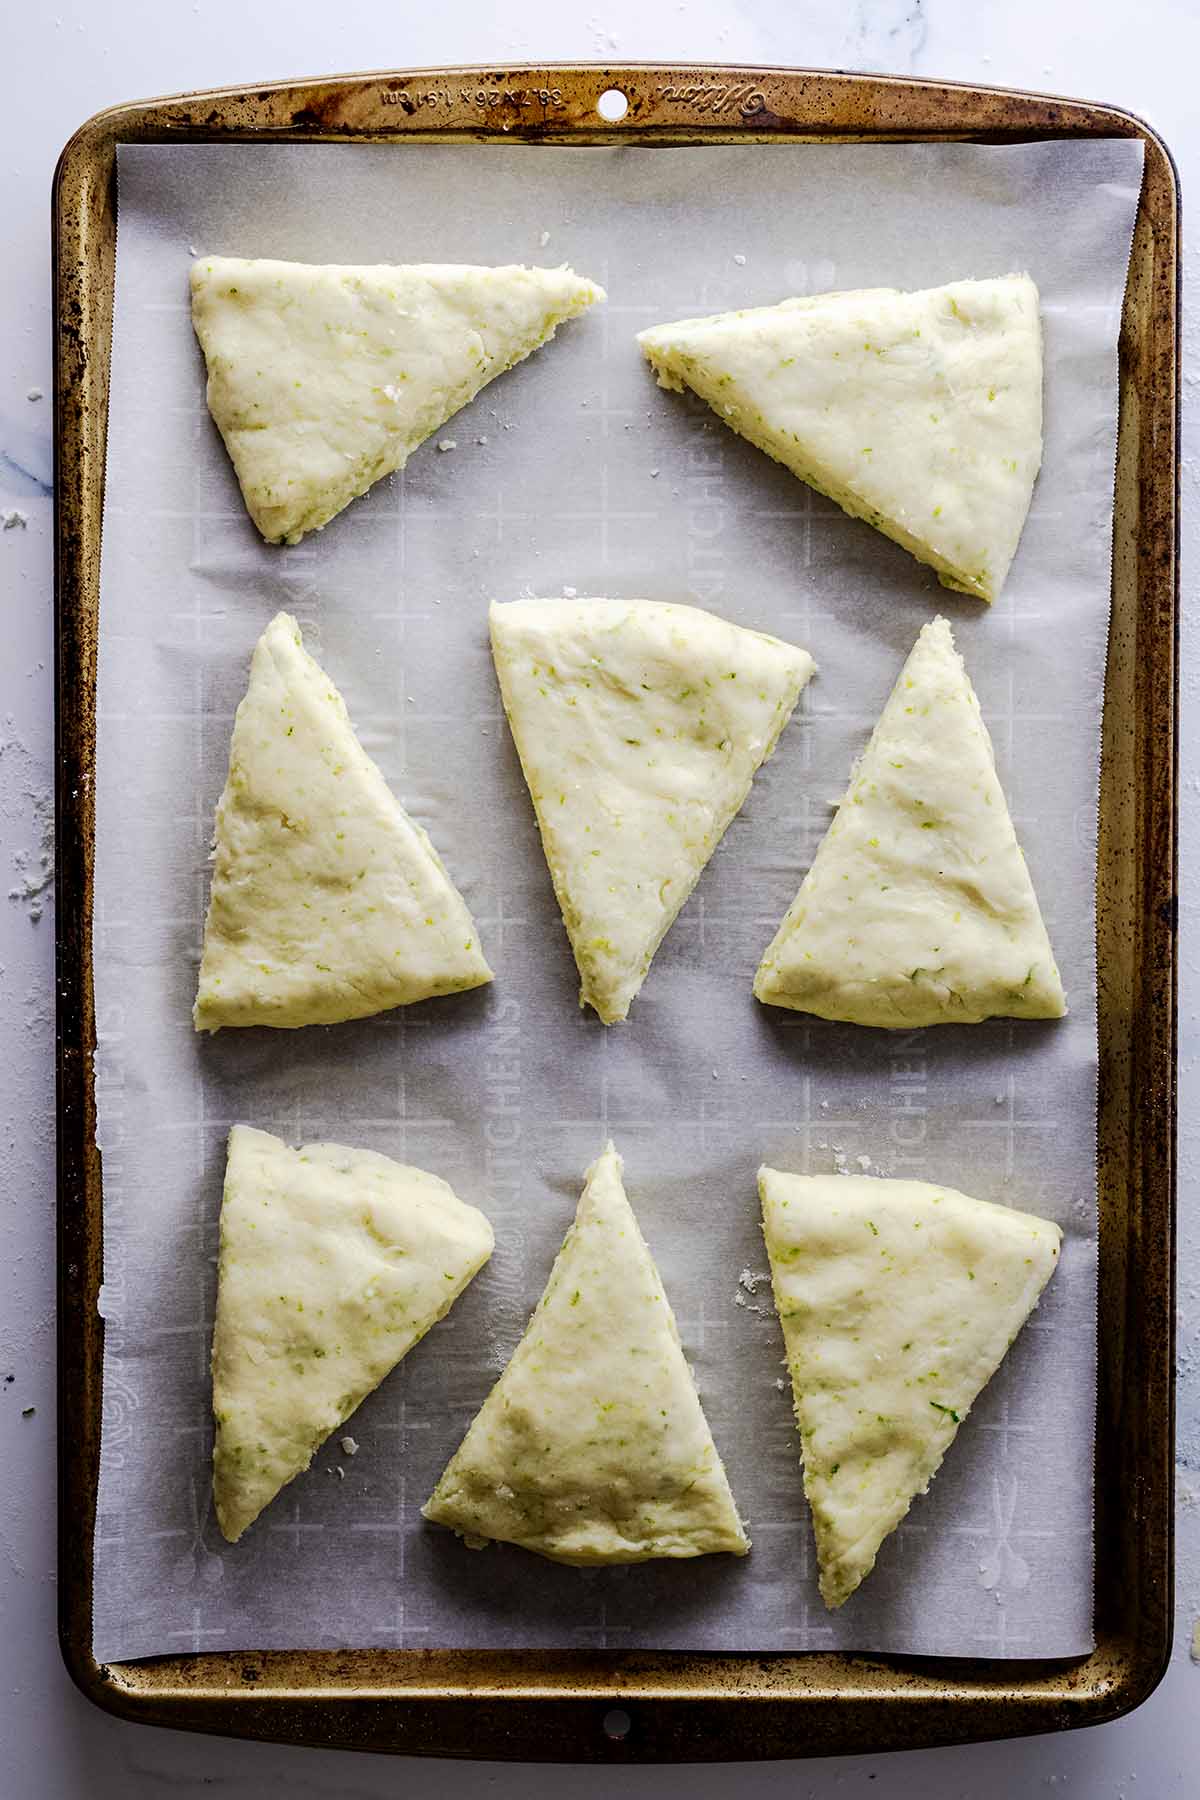 Unbaked lime scones on a parchment-lined baking sheet